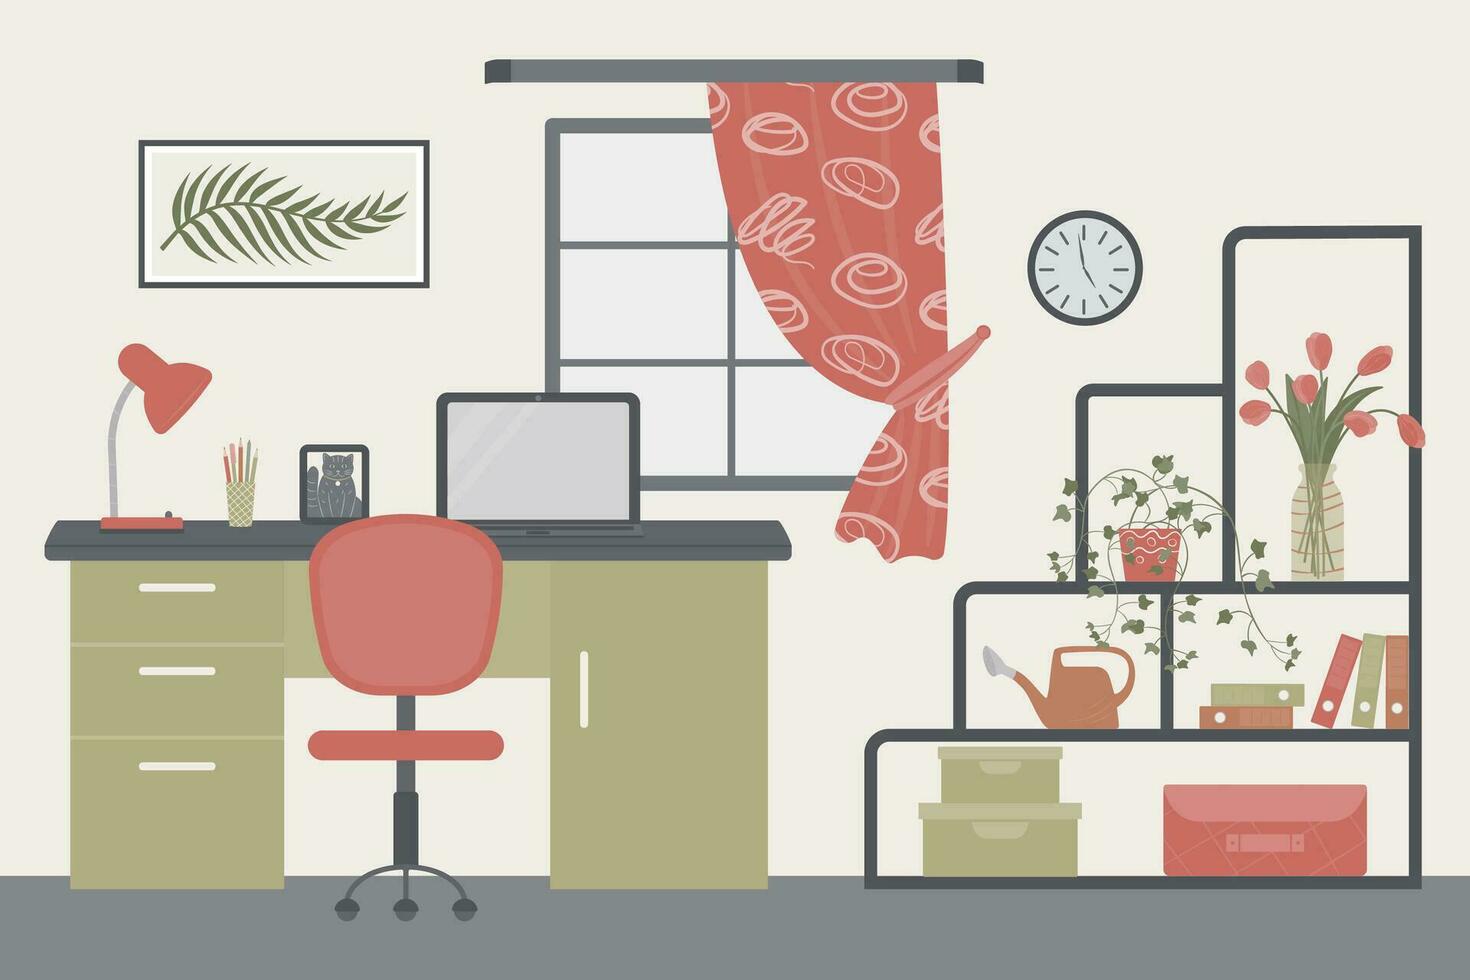 Interior design of an office with furniture a desk, a computer chair, shelves, a picture on the wall, indoor plants, a watering can, fresh flowers in a glass vase, storage boxes, folders,clock. vector